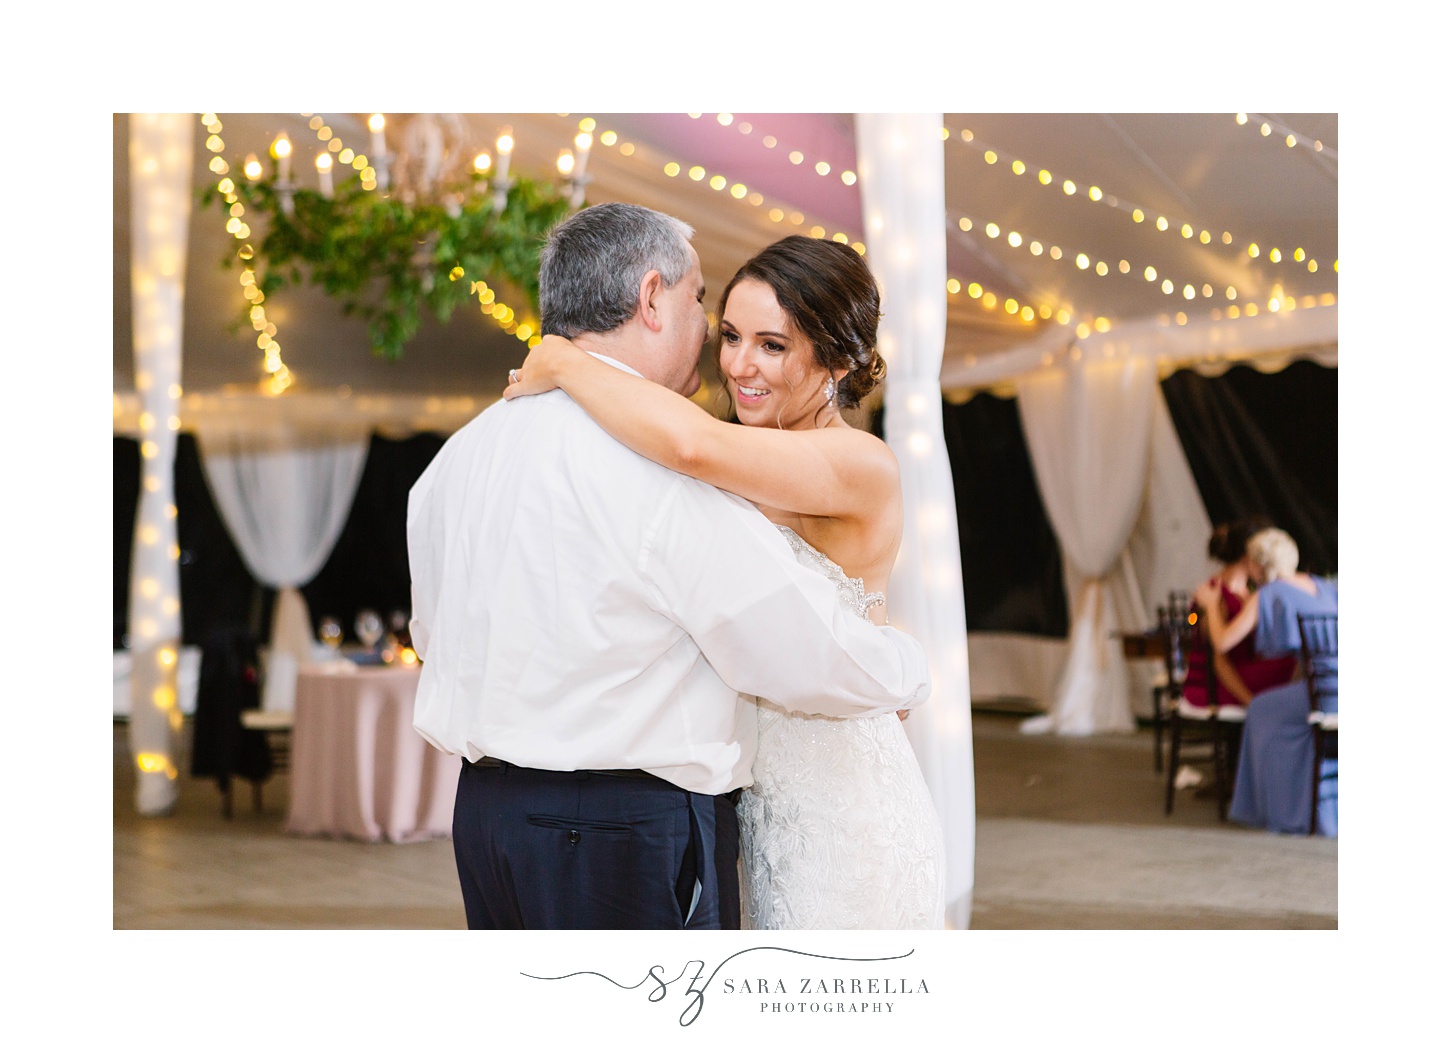 father-daughter dance at Blithewold Mansion wedding reception